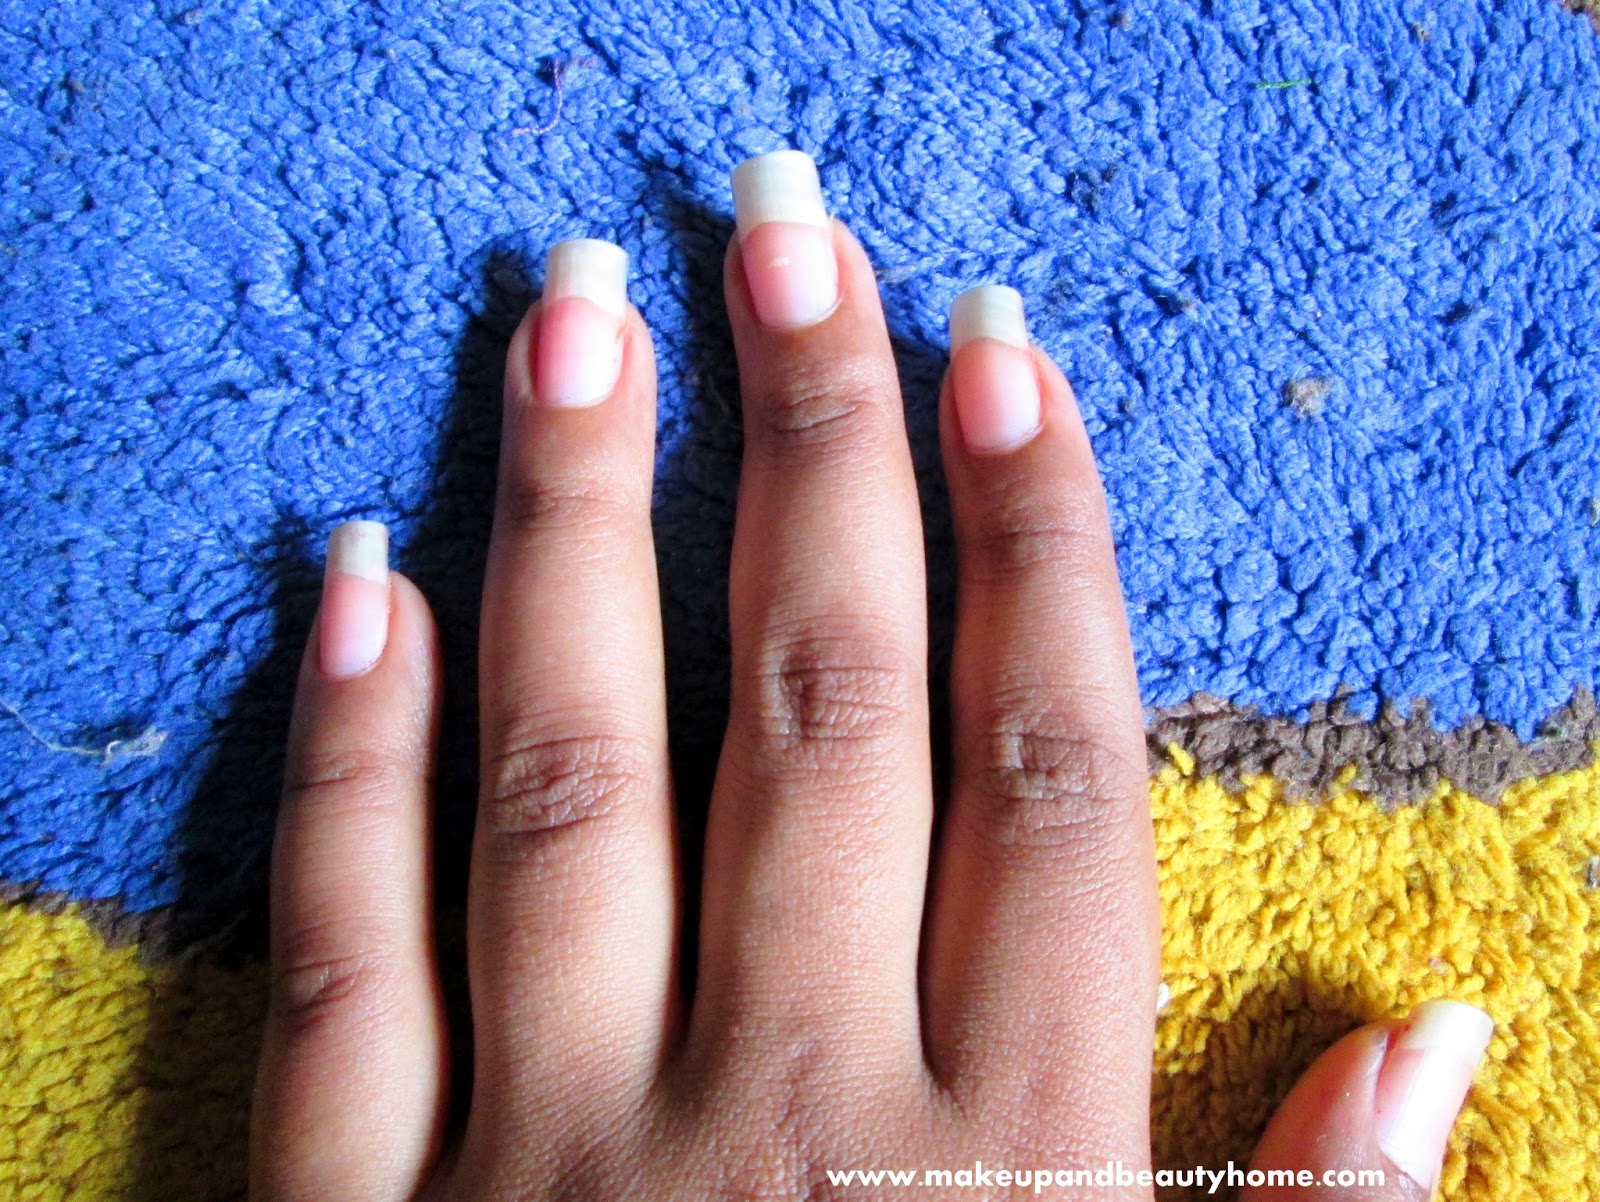 "Nail art is the perfect way to express yourself." - wide 7